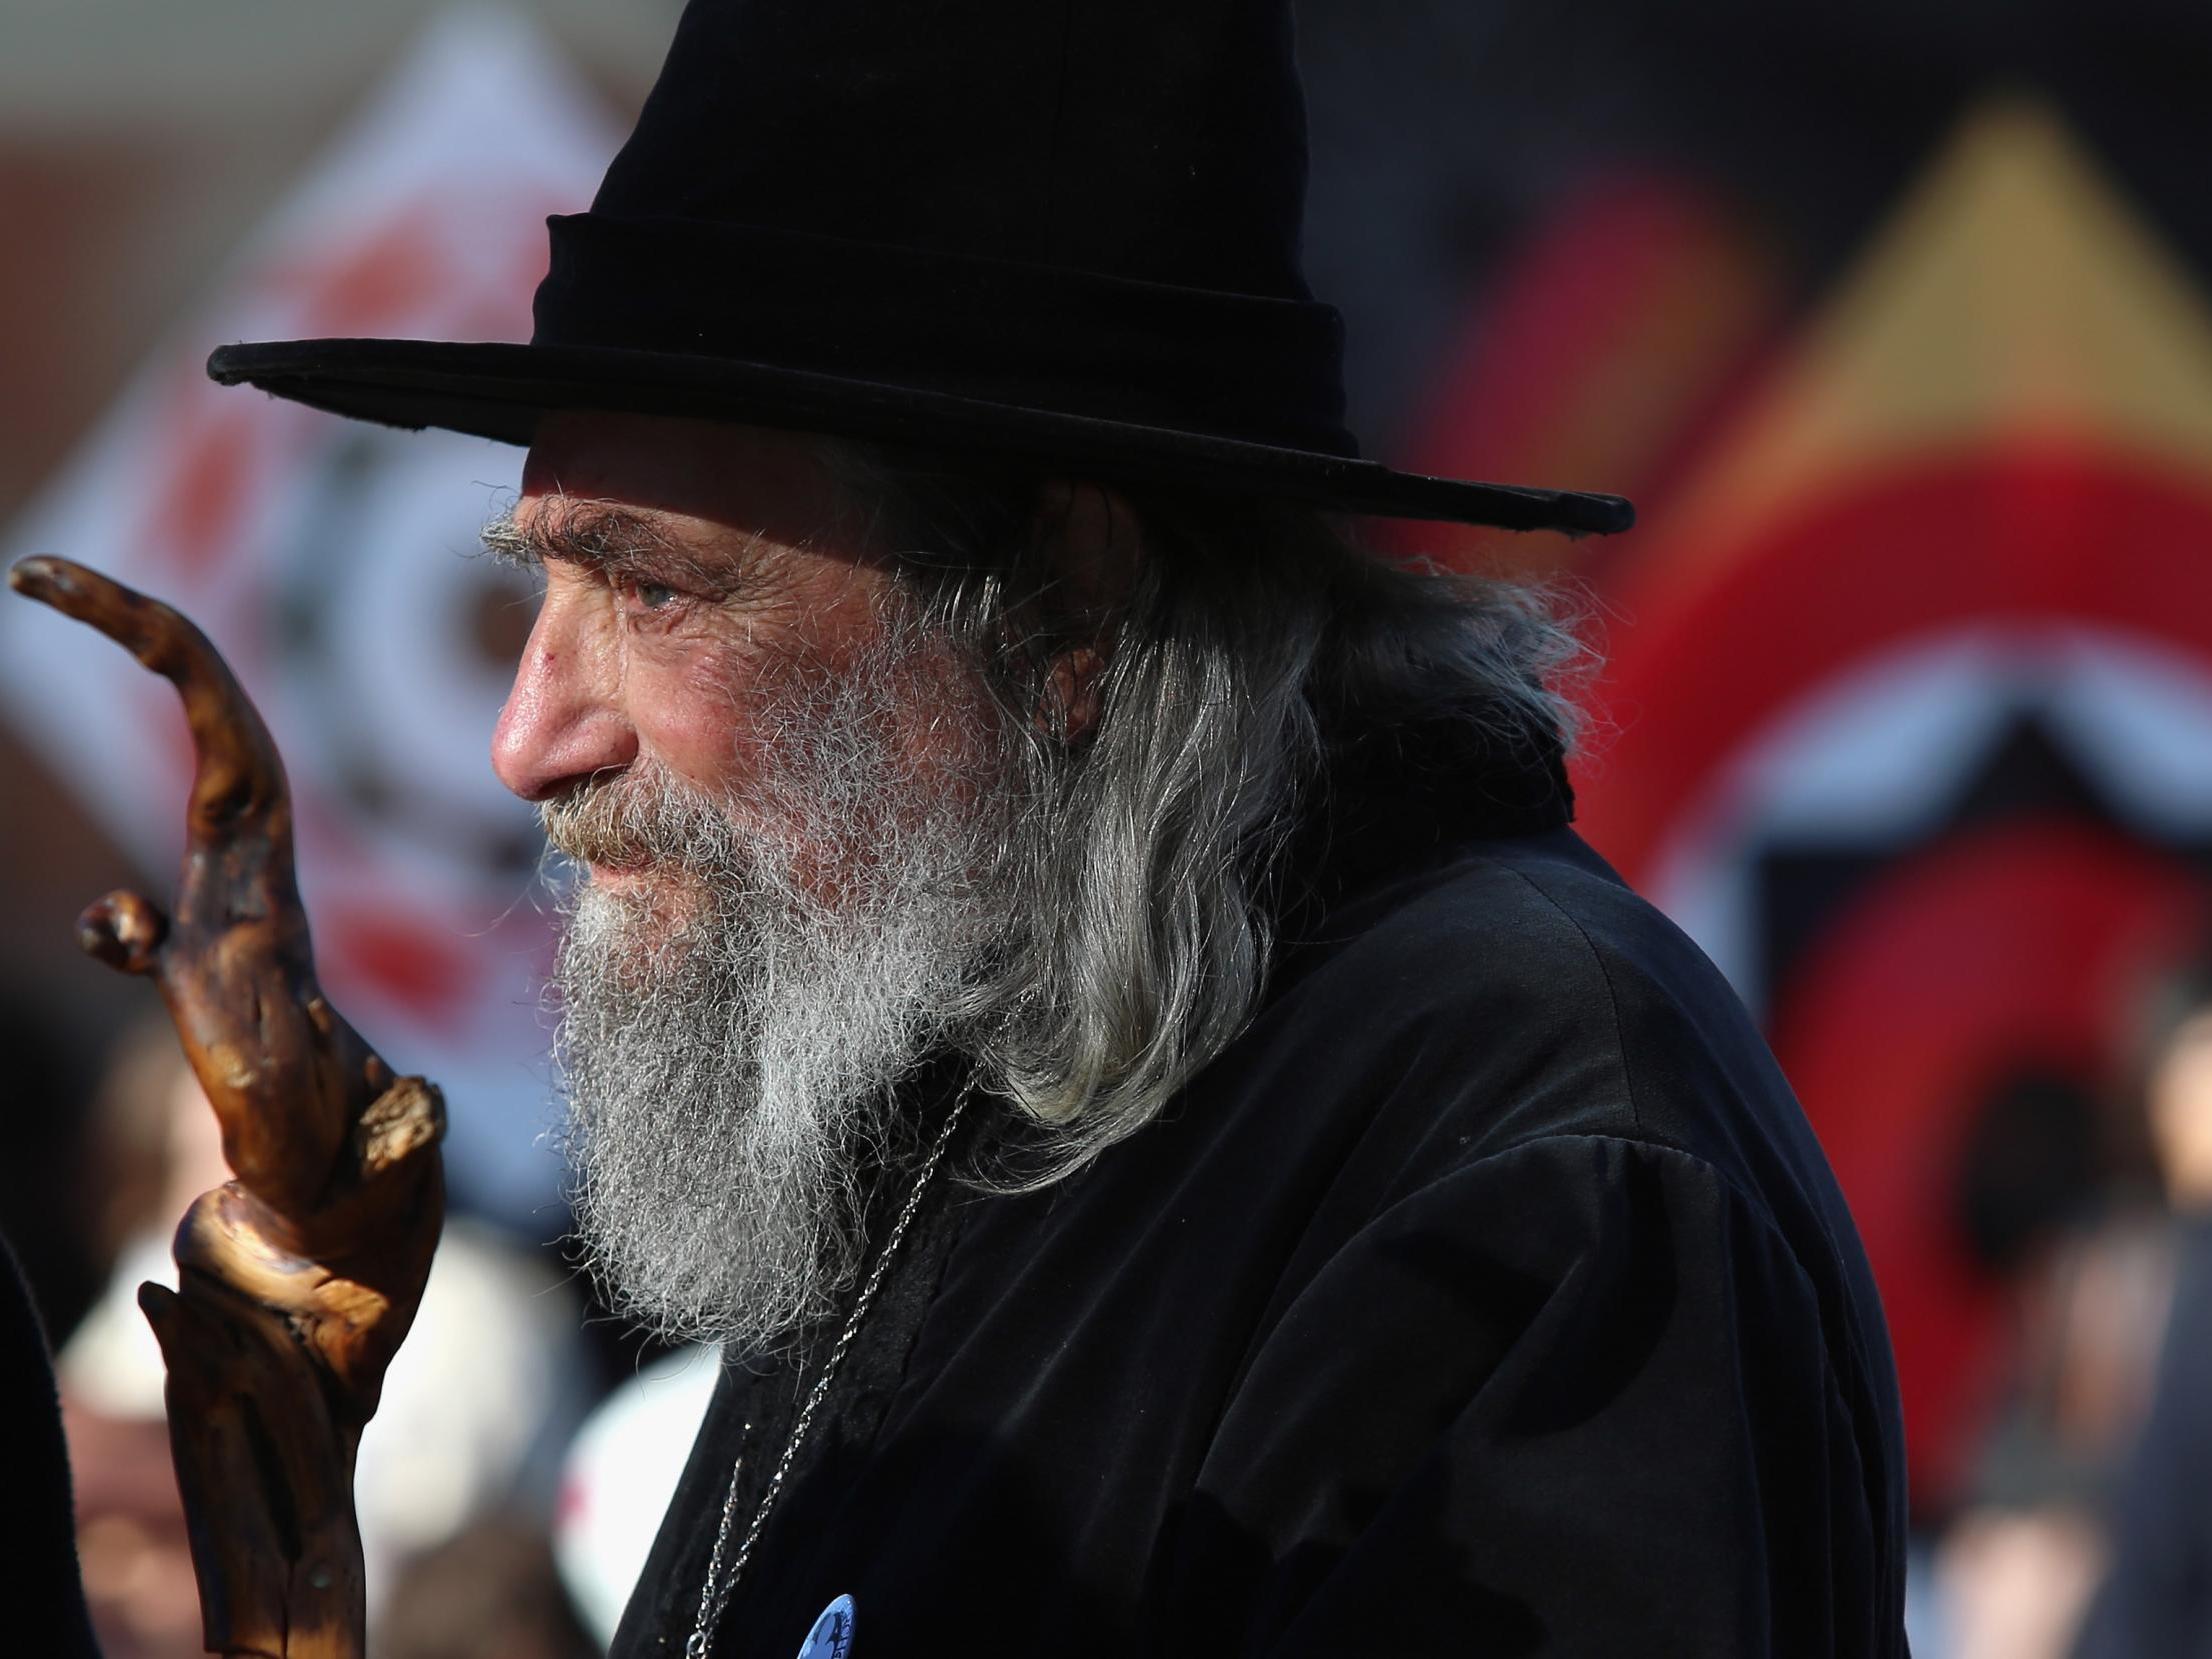 Ian Channell, known as The Wizard, has been a fixture in Christchurch's Cathedral Square for decades.